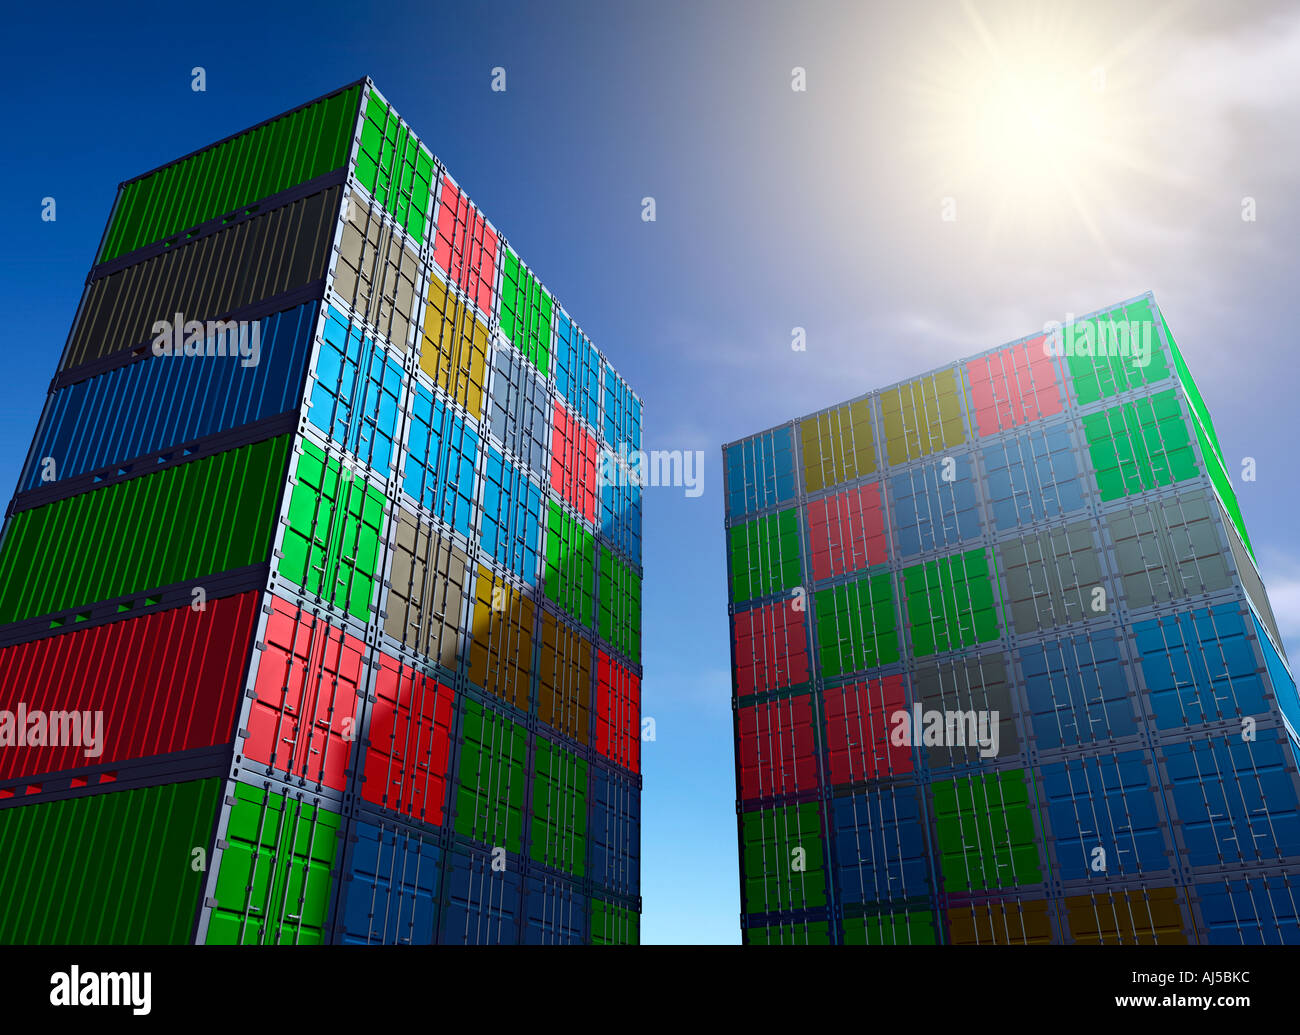 container sea see cargo transport trade Stock Photo